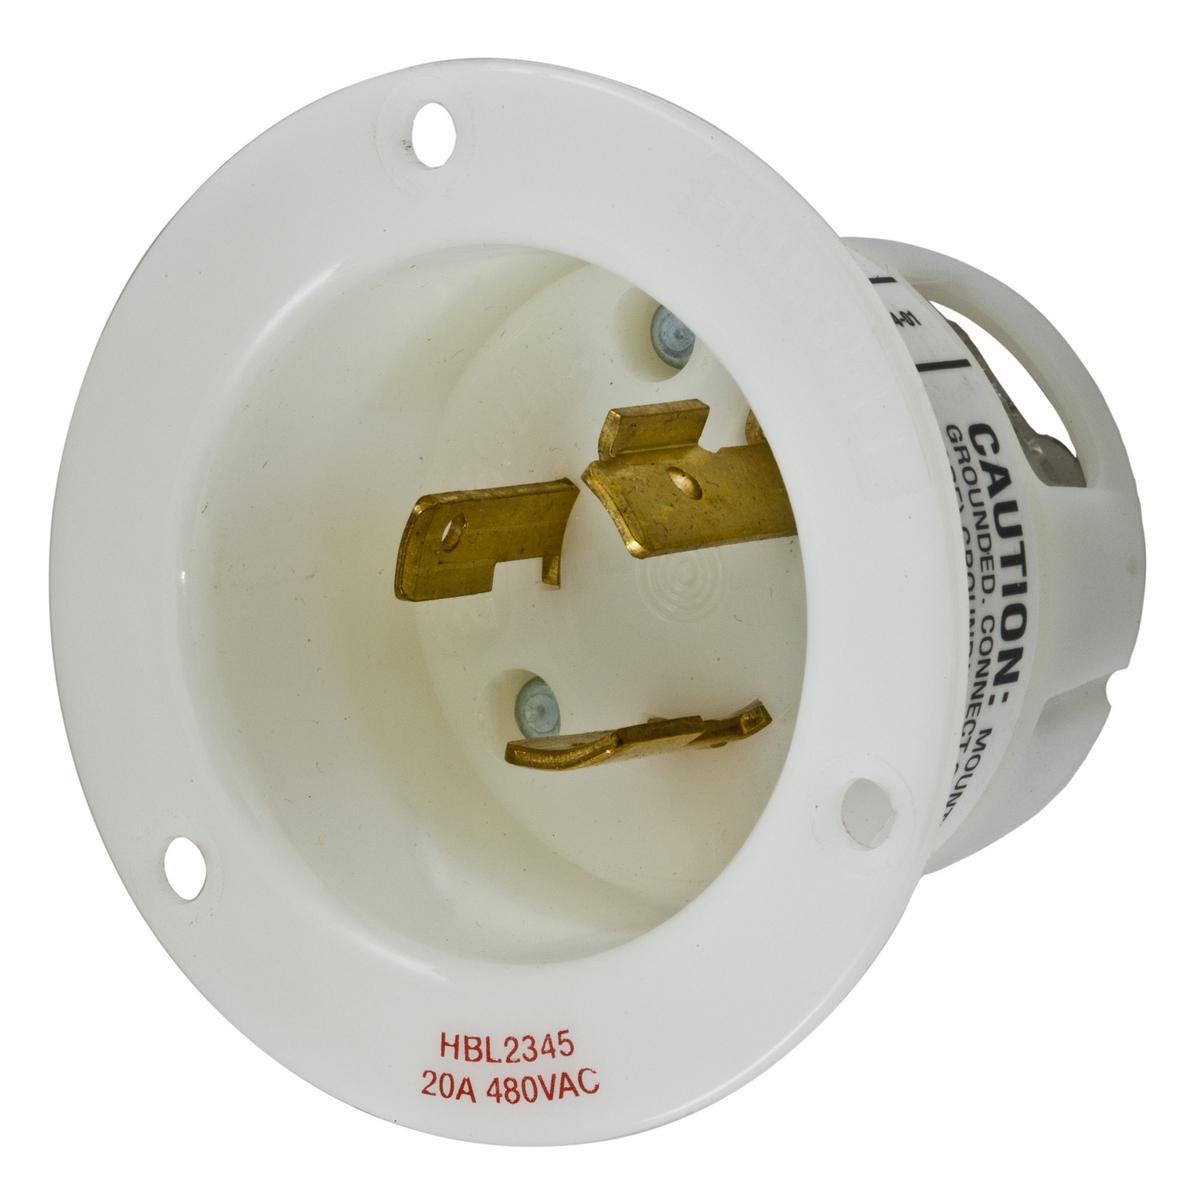 Hubbell HBL2345 Locking Devices, Twist-Lock®, Industrial, Insulgrip® Flanged Inlet, 20A 480V AC, 2-Pole 3-Wire Grounding, NEMA L8-20P, Screw Terminal, Nylon casing, Back wired, White.  ; Backwired terminations for ease of installation ; #10-32 Multiple drive terminal scr